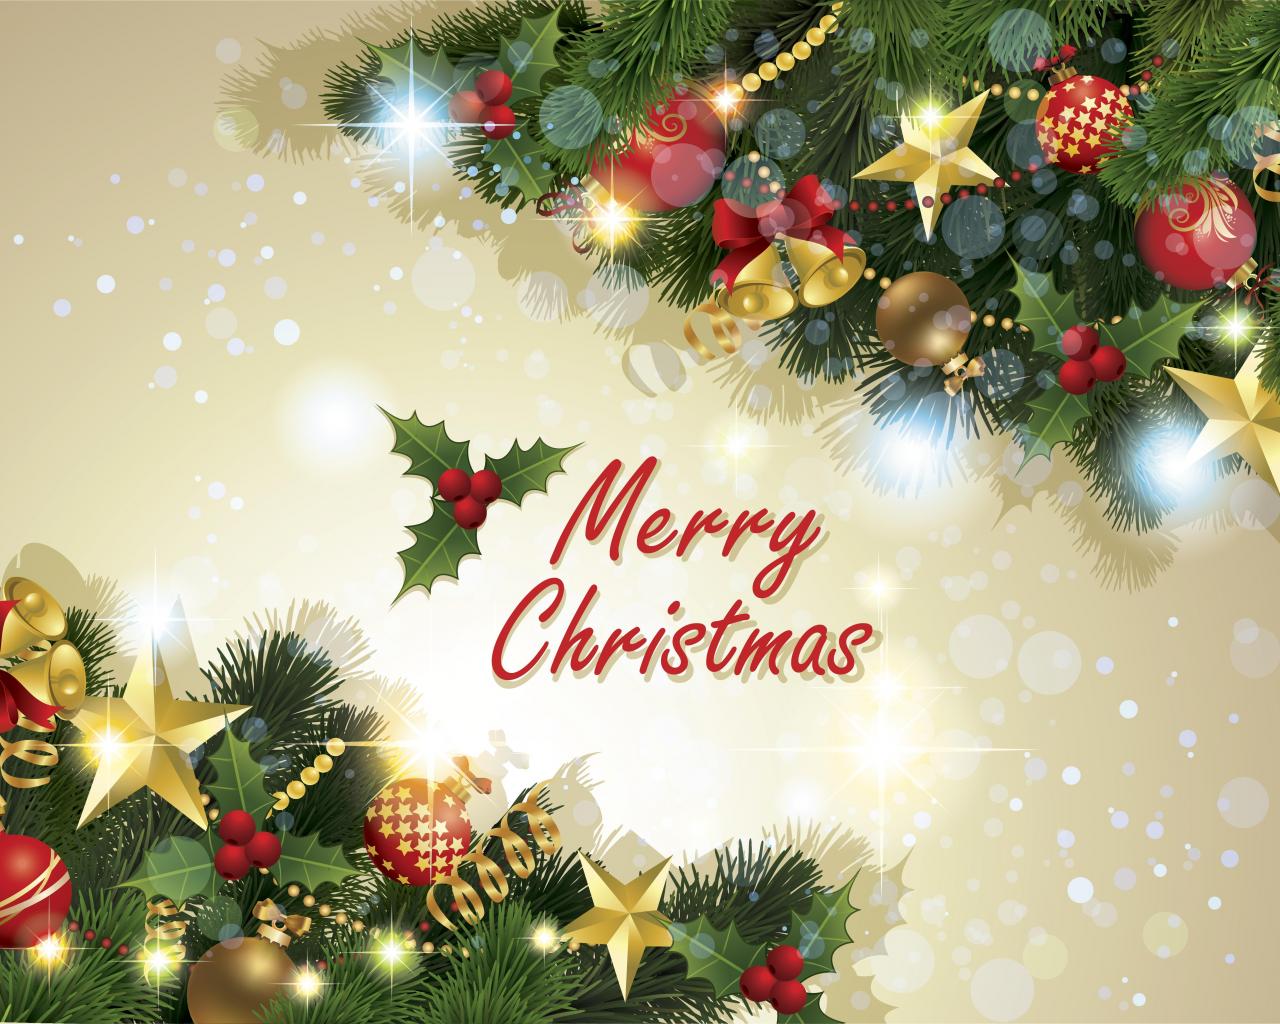 Happy Christmas Images Download - 1280x1024 Wallpaper 